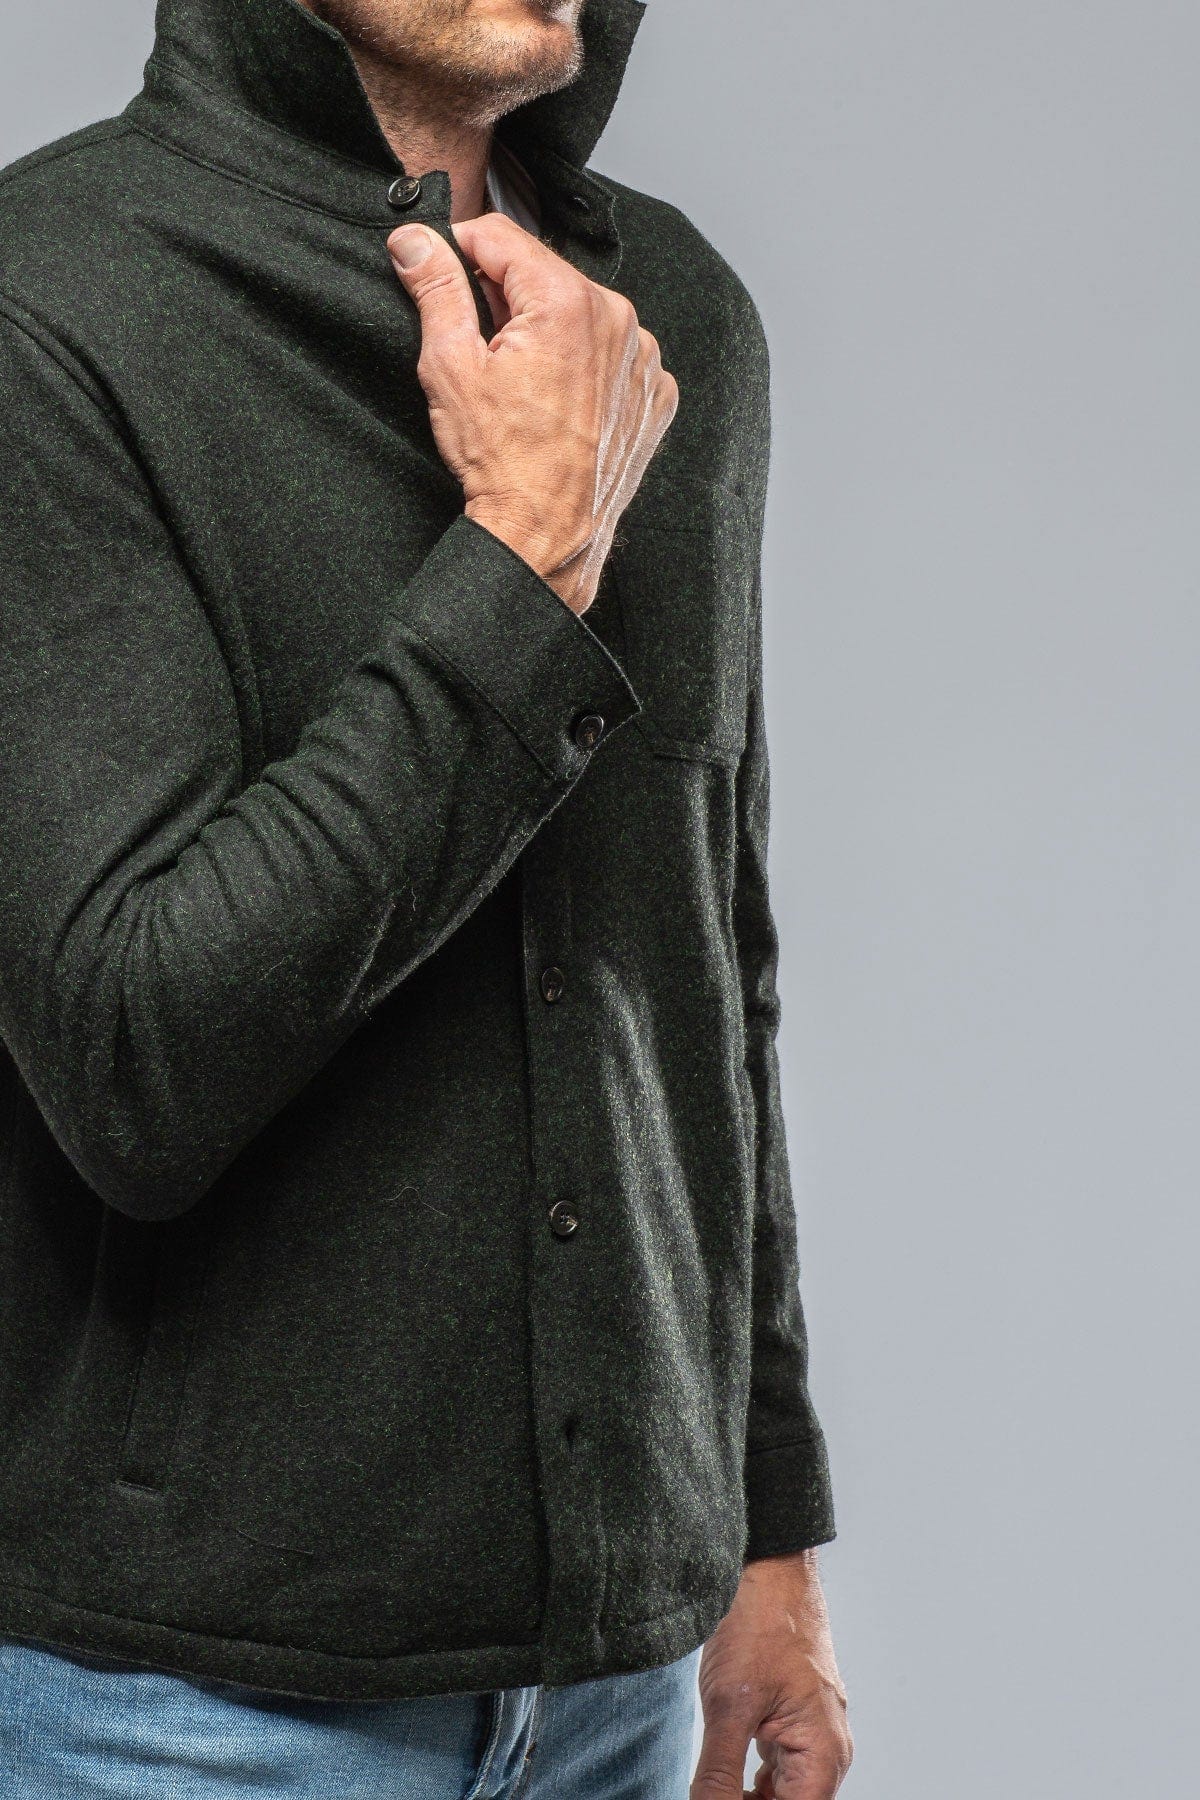 Sooter Cashmere Overshirt in Green - AXEL'S